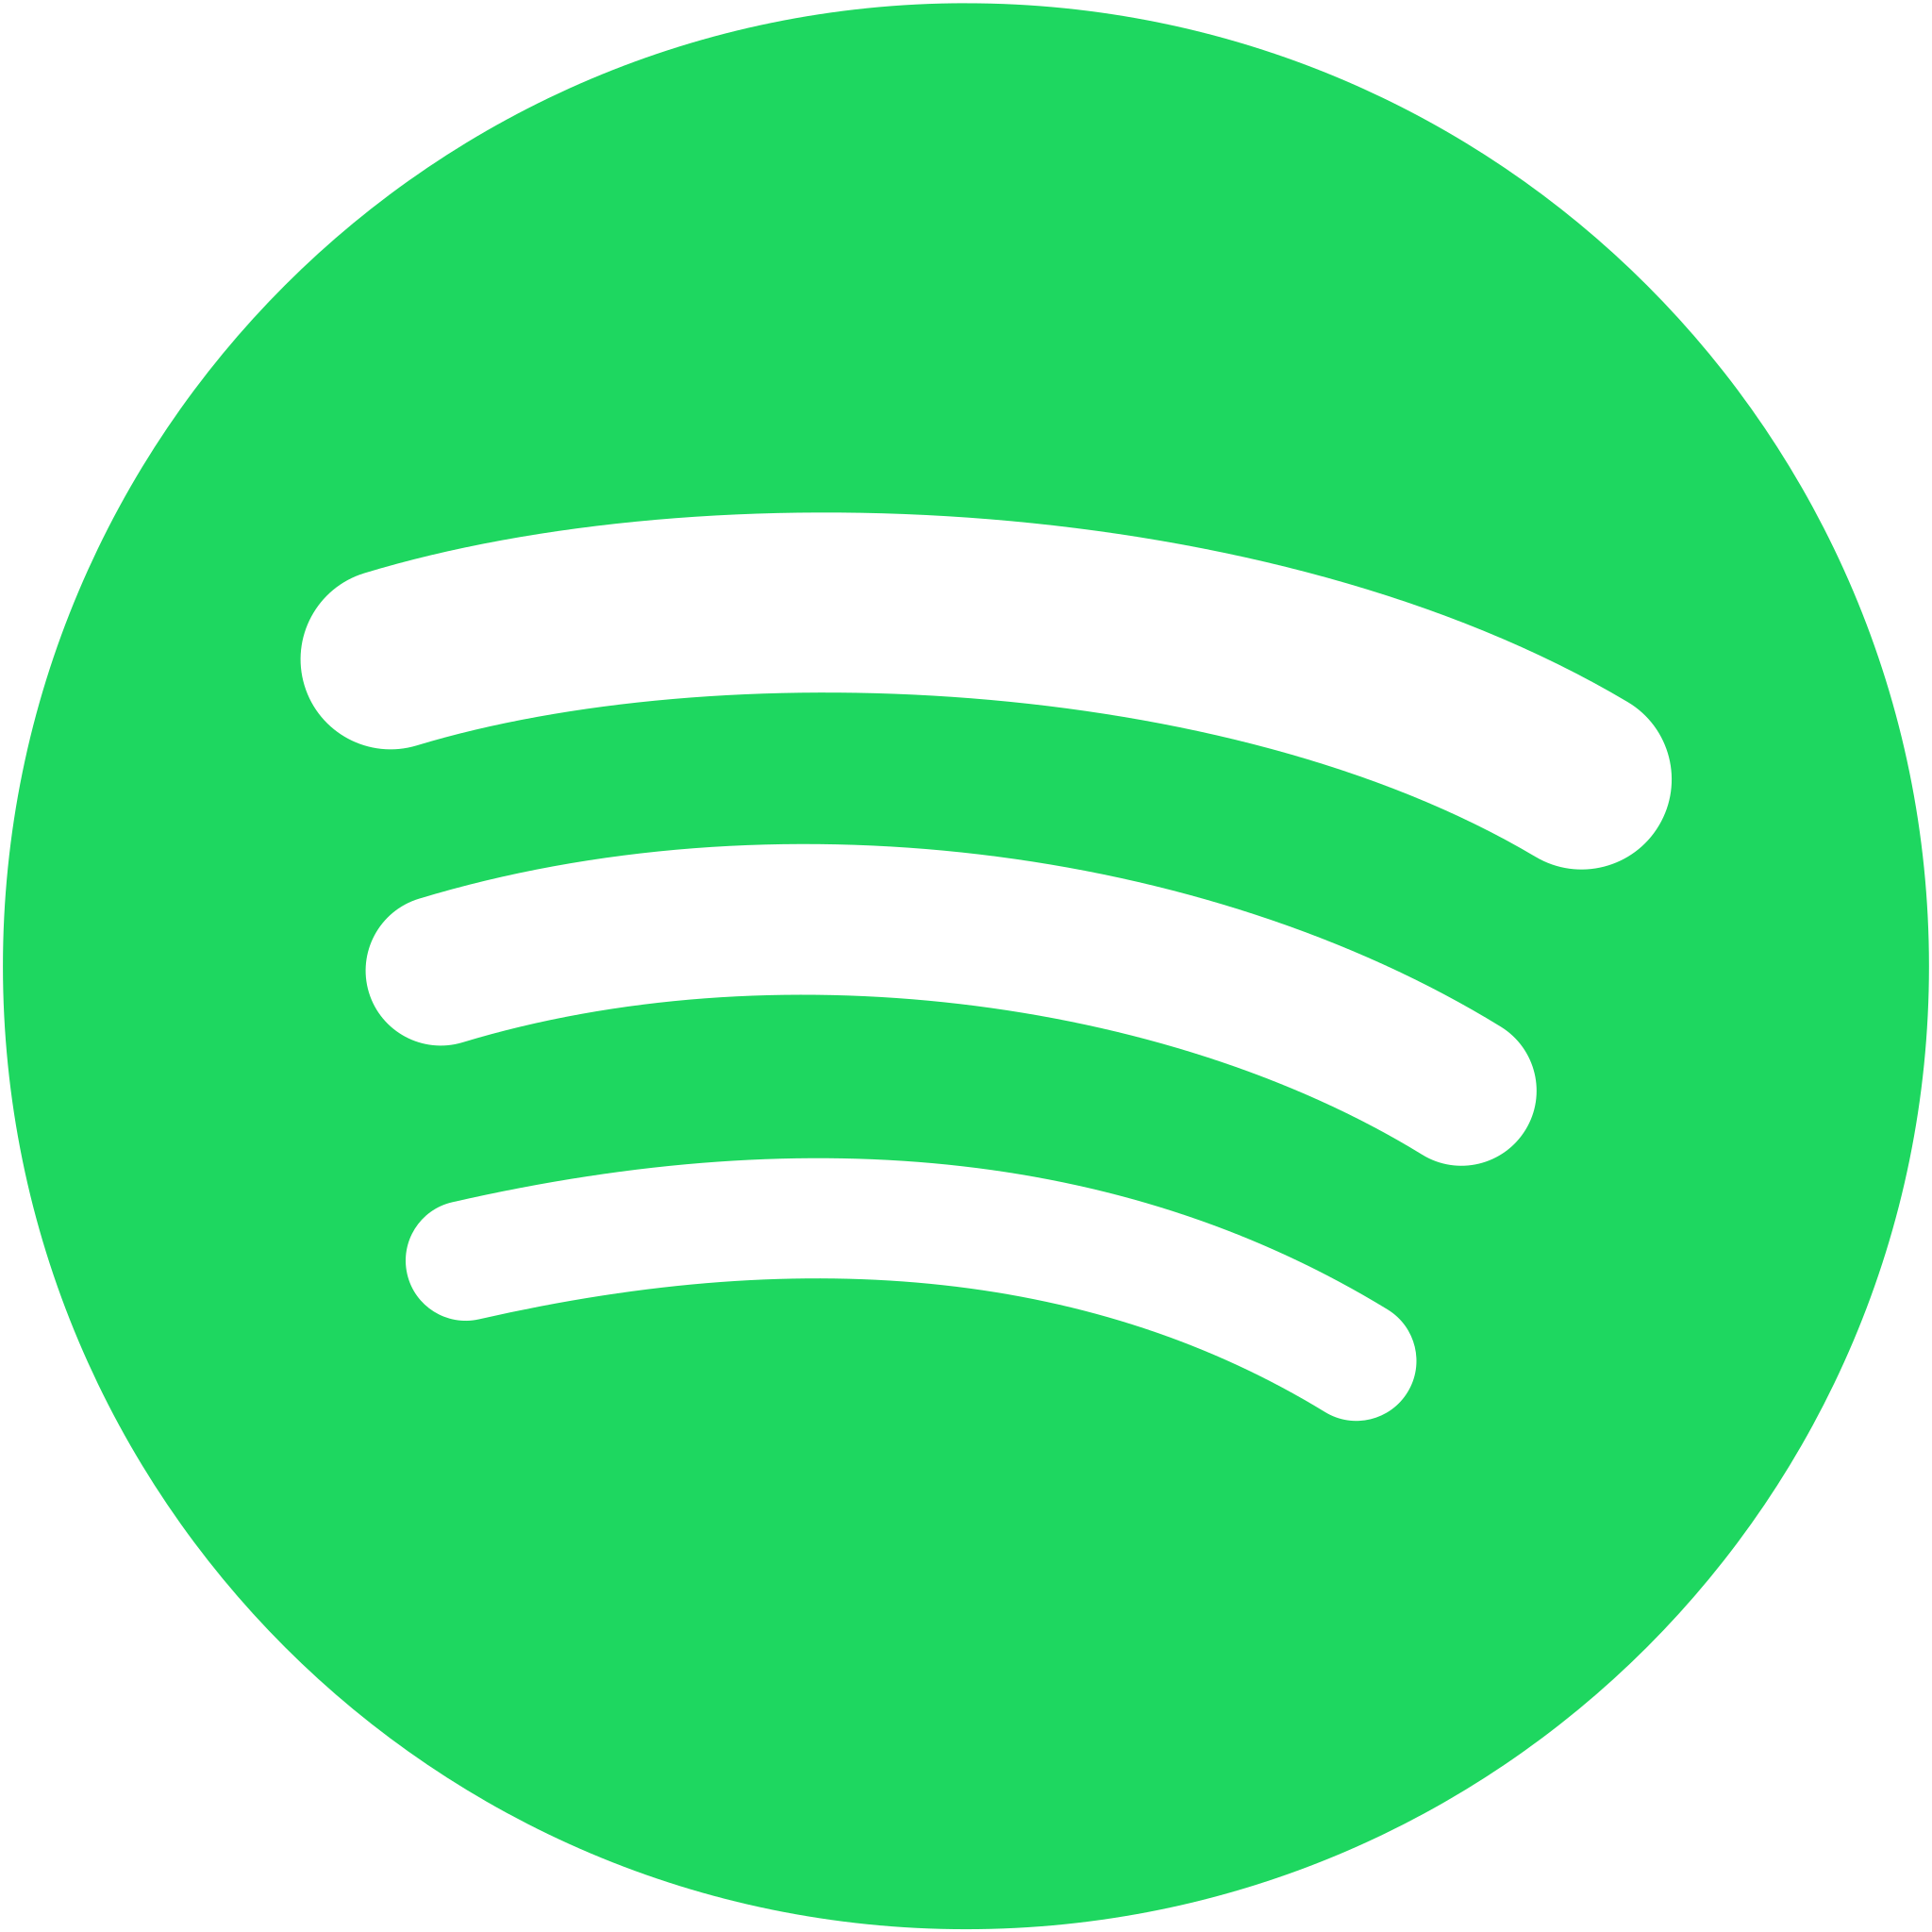 Spotify logo with a white background.